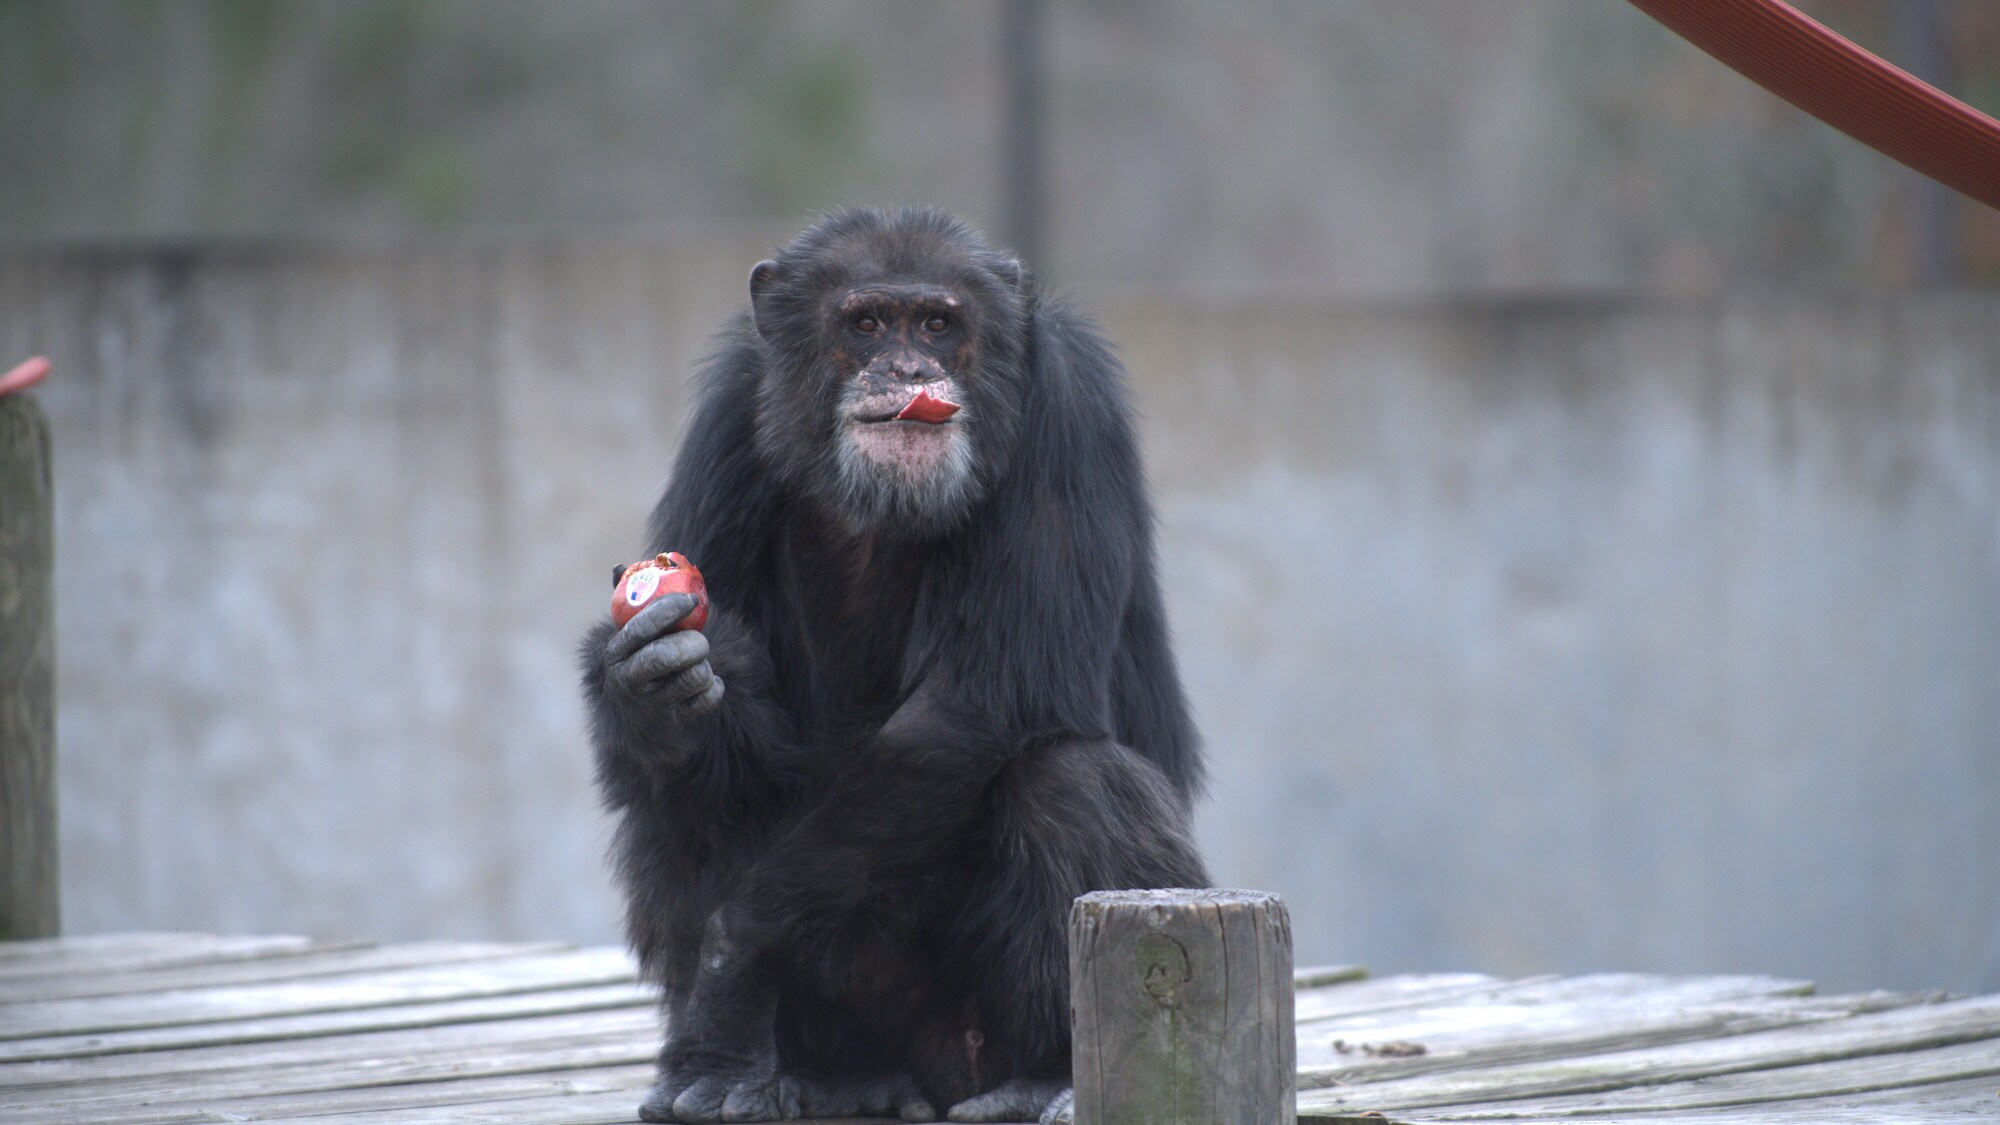 Hawkins eating an apple. Apple peel sticking out of his mouth. Spock’s group. (Chimp Haven)